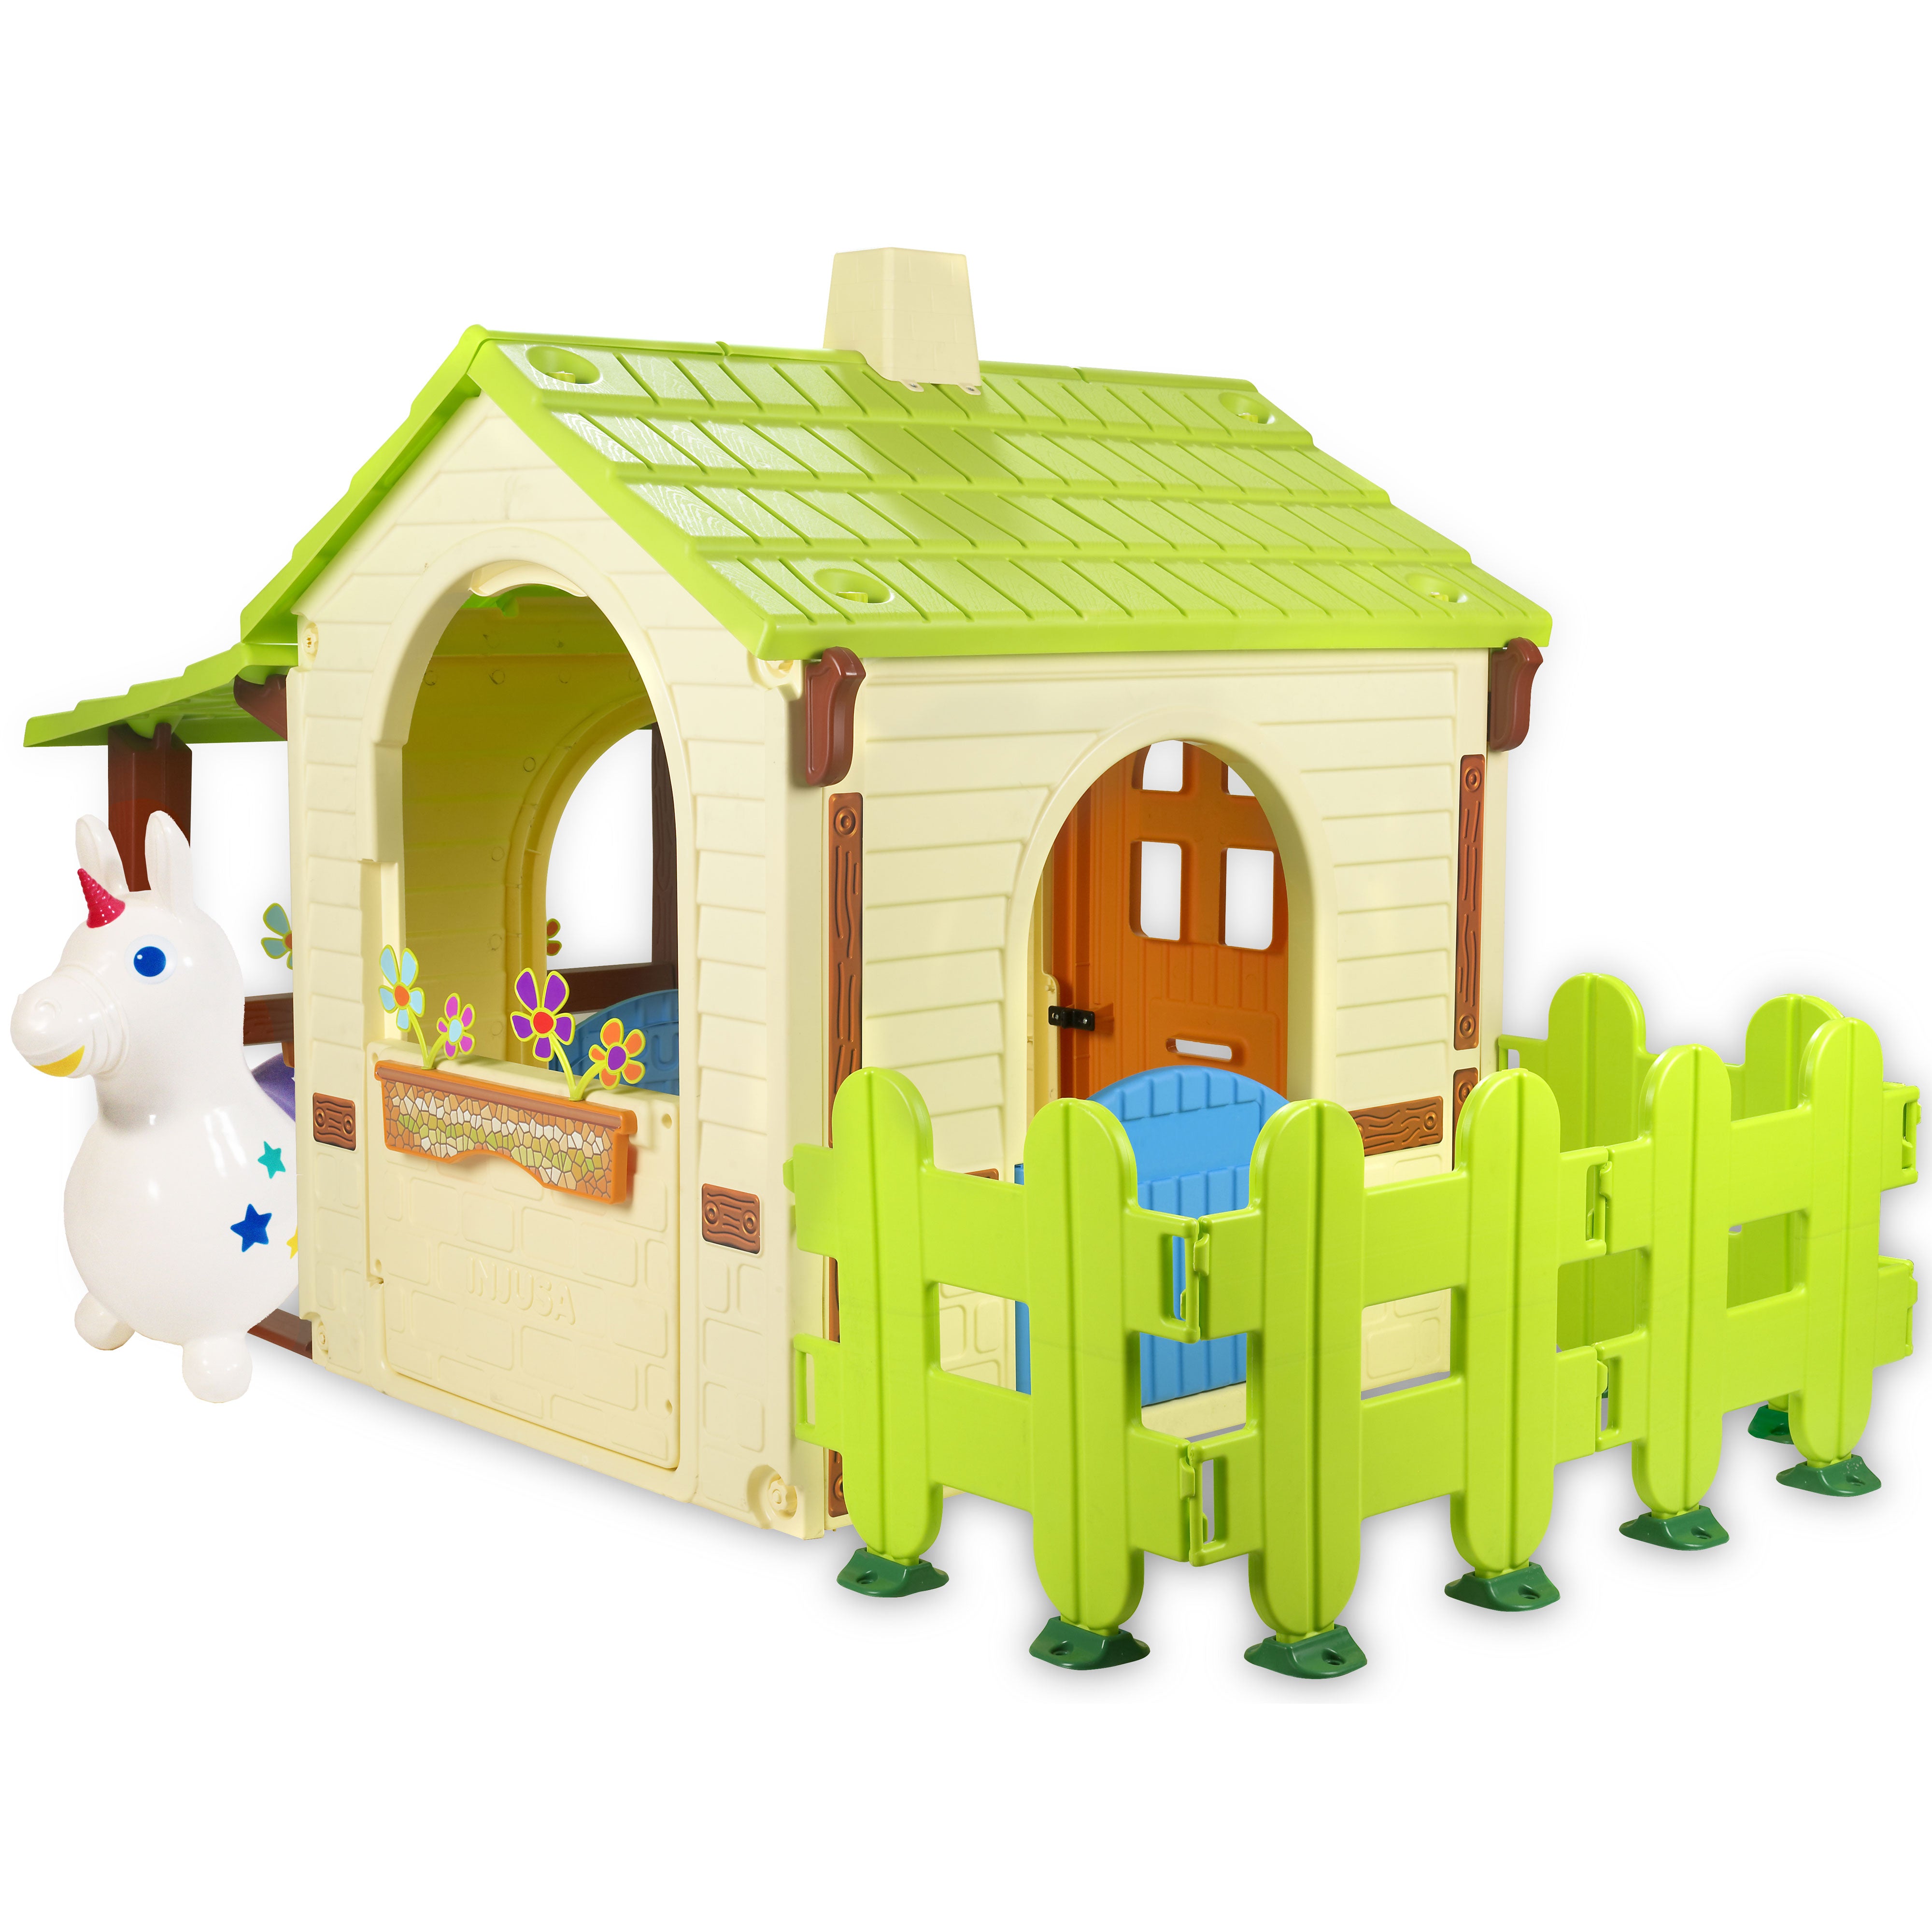 Studio image of the Country Playhouse with the White Rody Magical Unicorn.